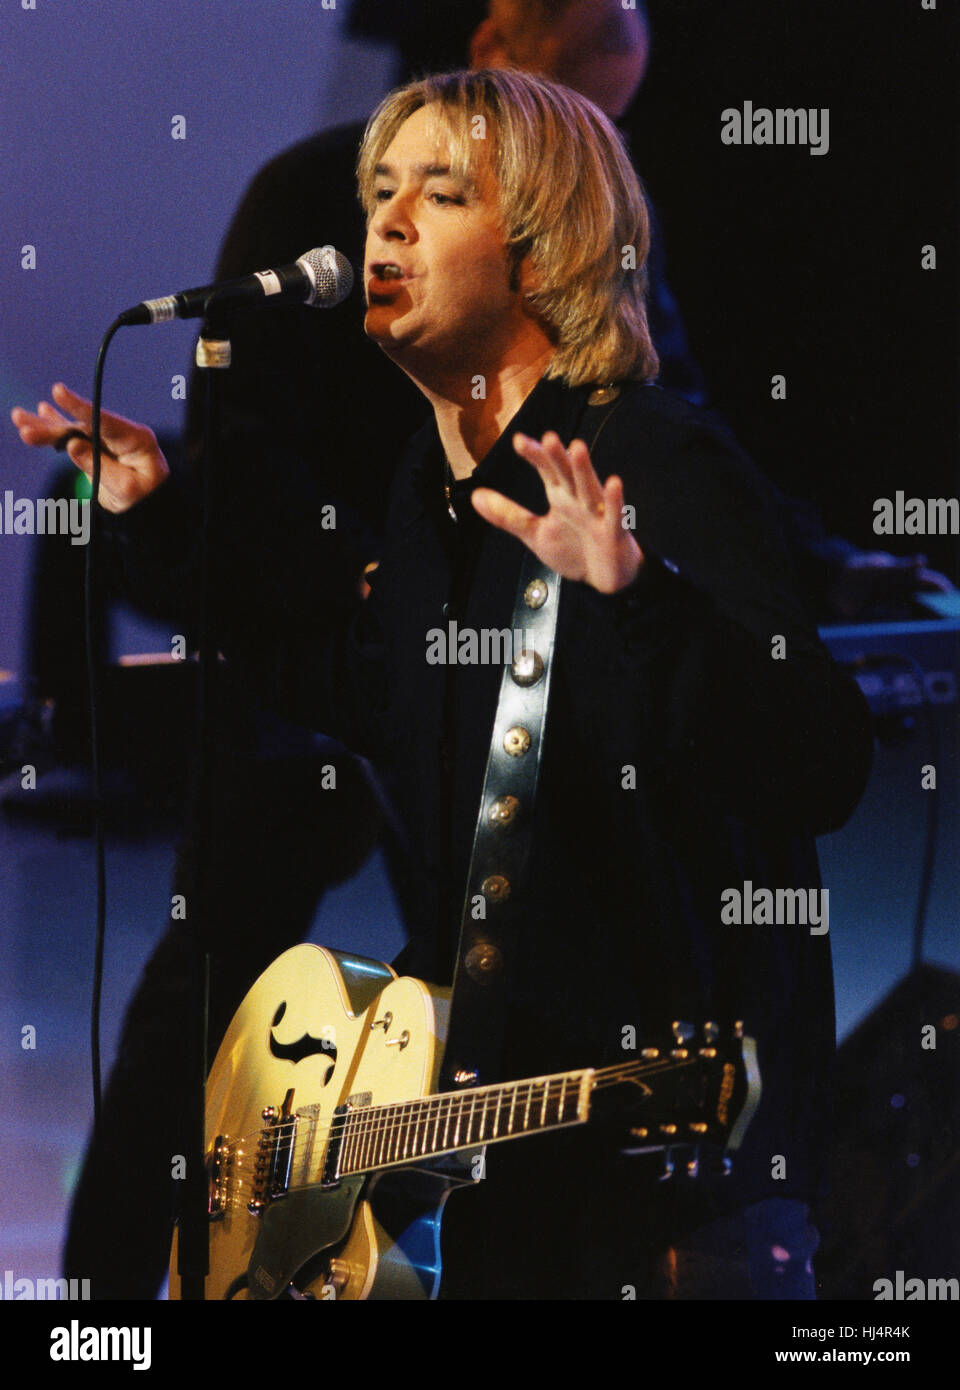 PER GESSLE member of Swedish group Roxette 2000 on stage during concert Stock Photo